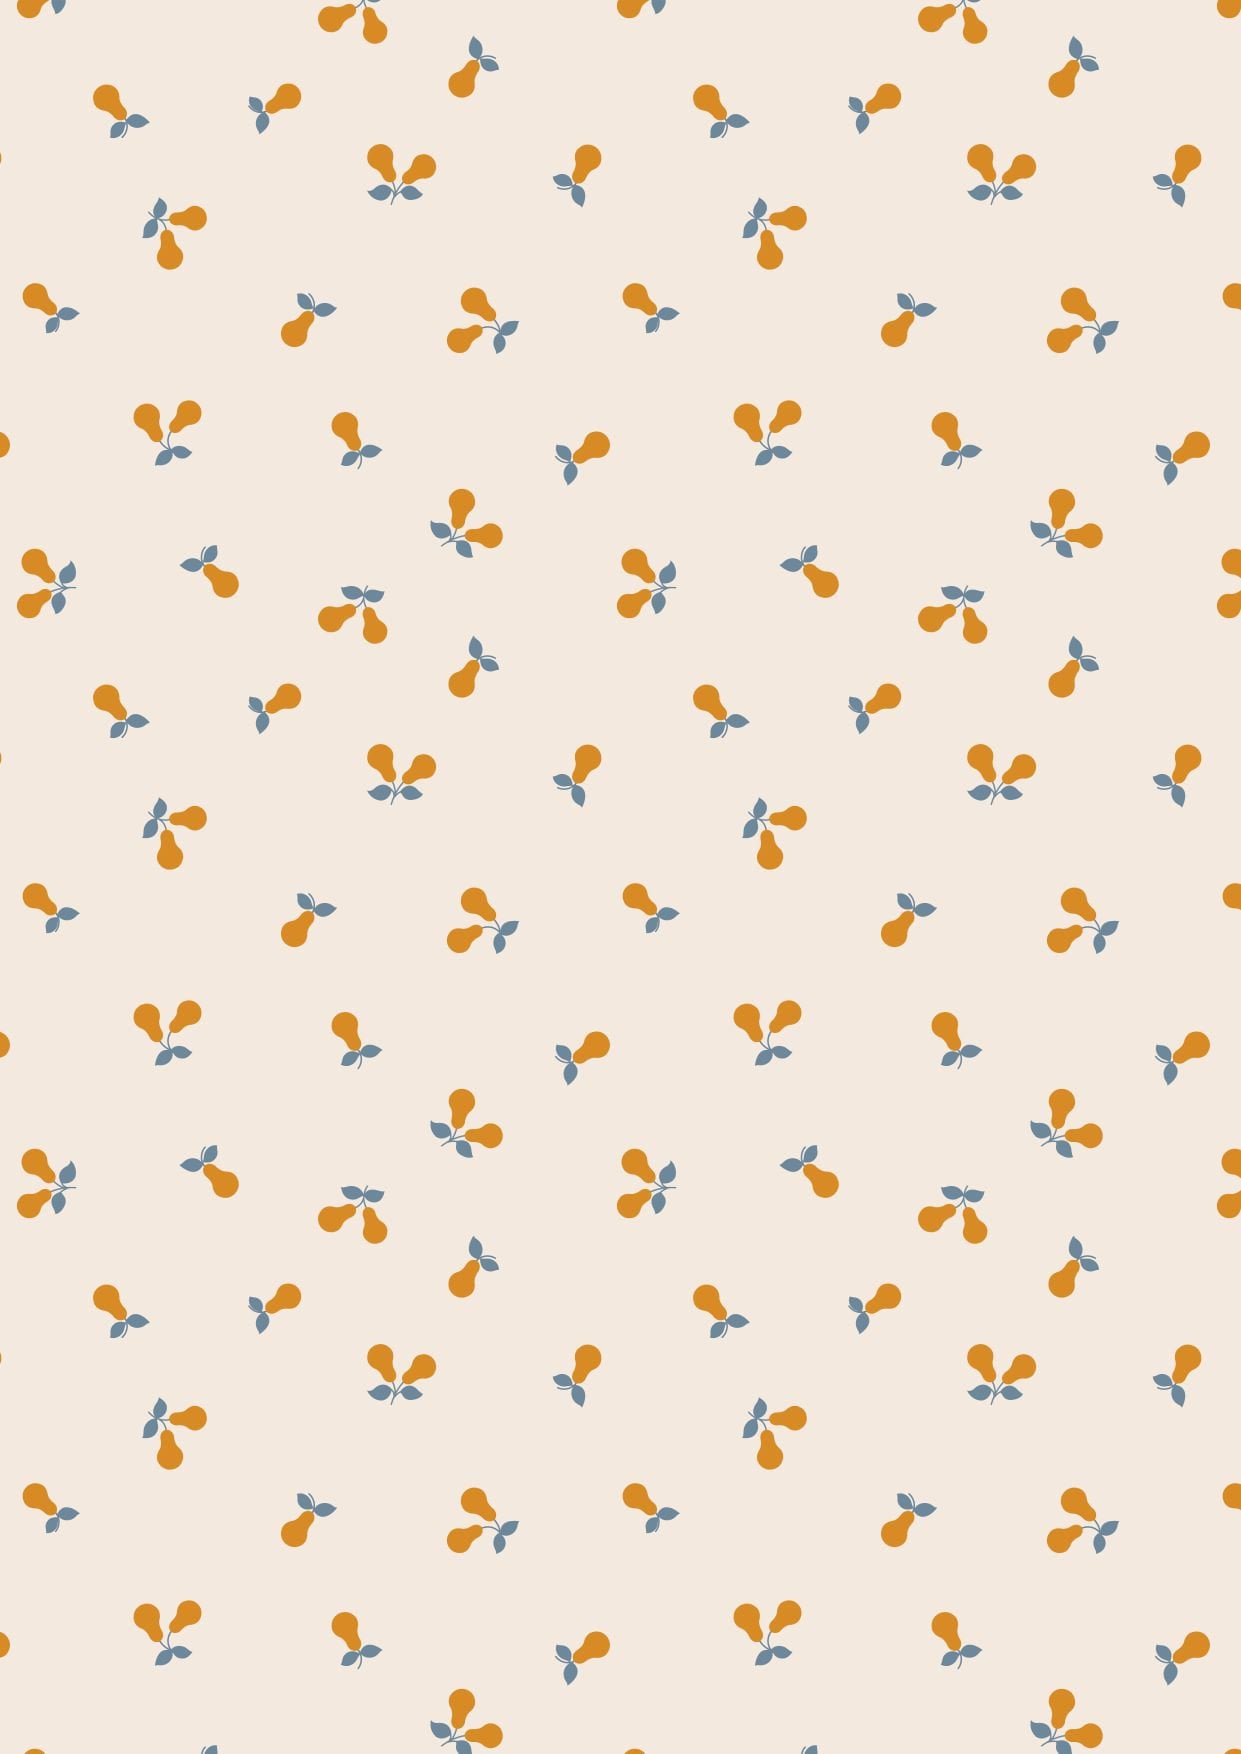 Gold Metallic Flowers on Cream 100% cotton fabric - A584.1 Wintertide by Lewis & Irene